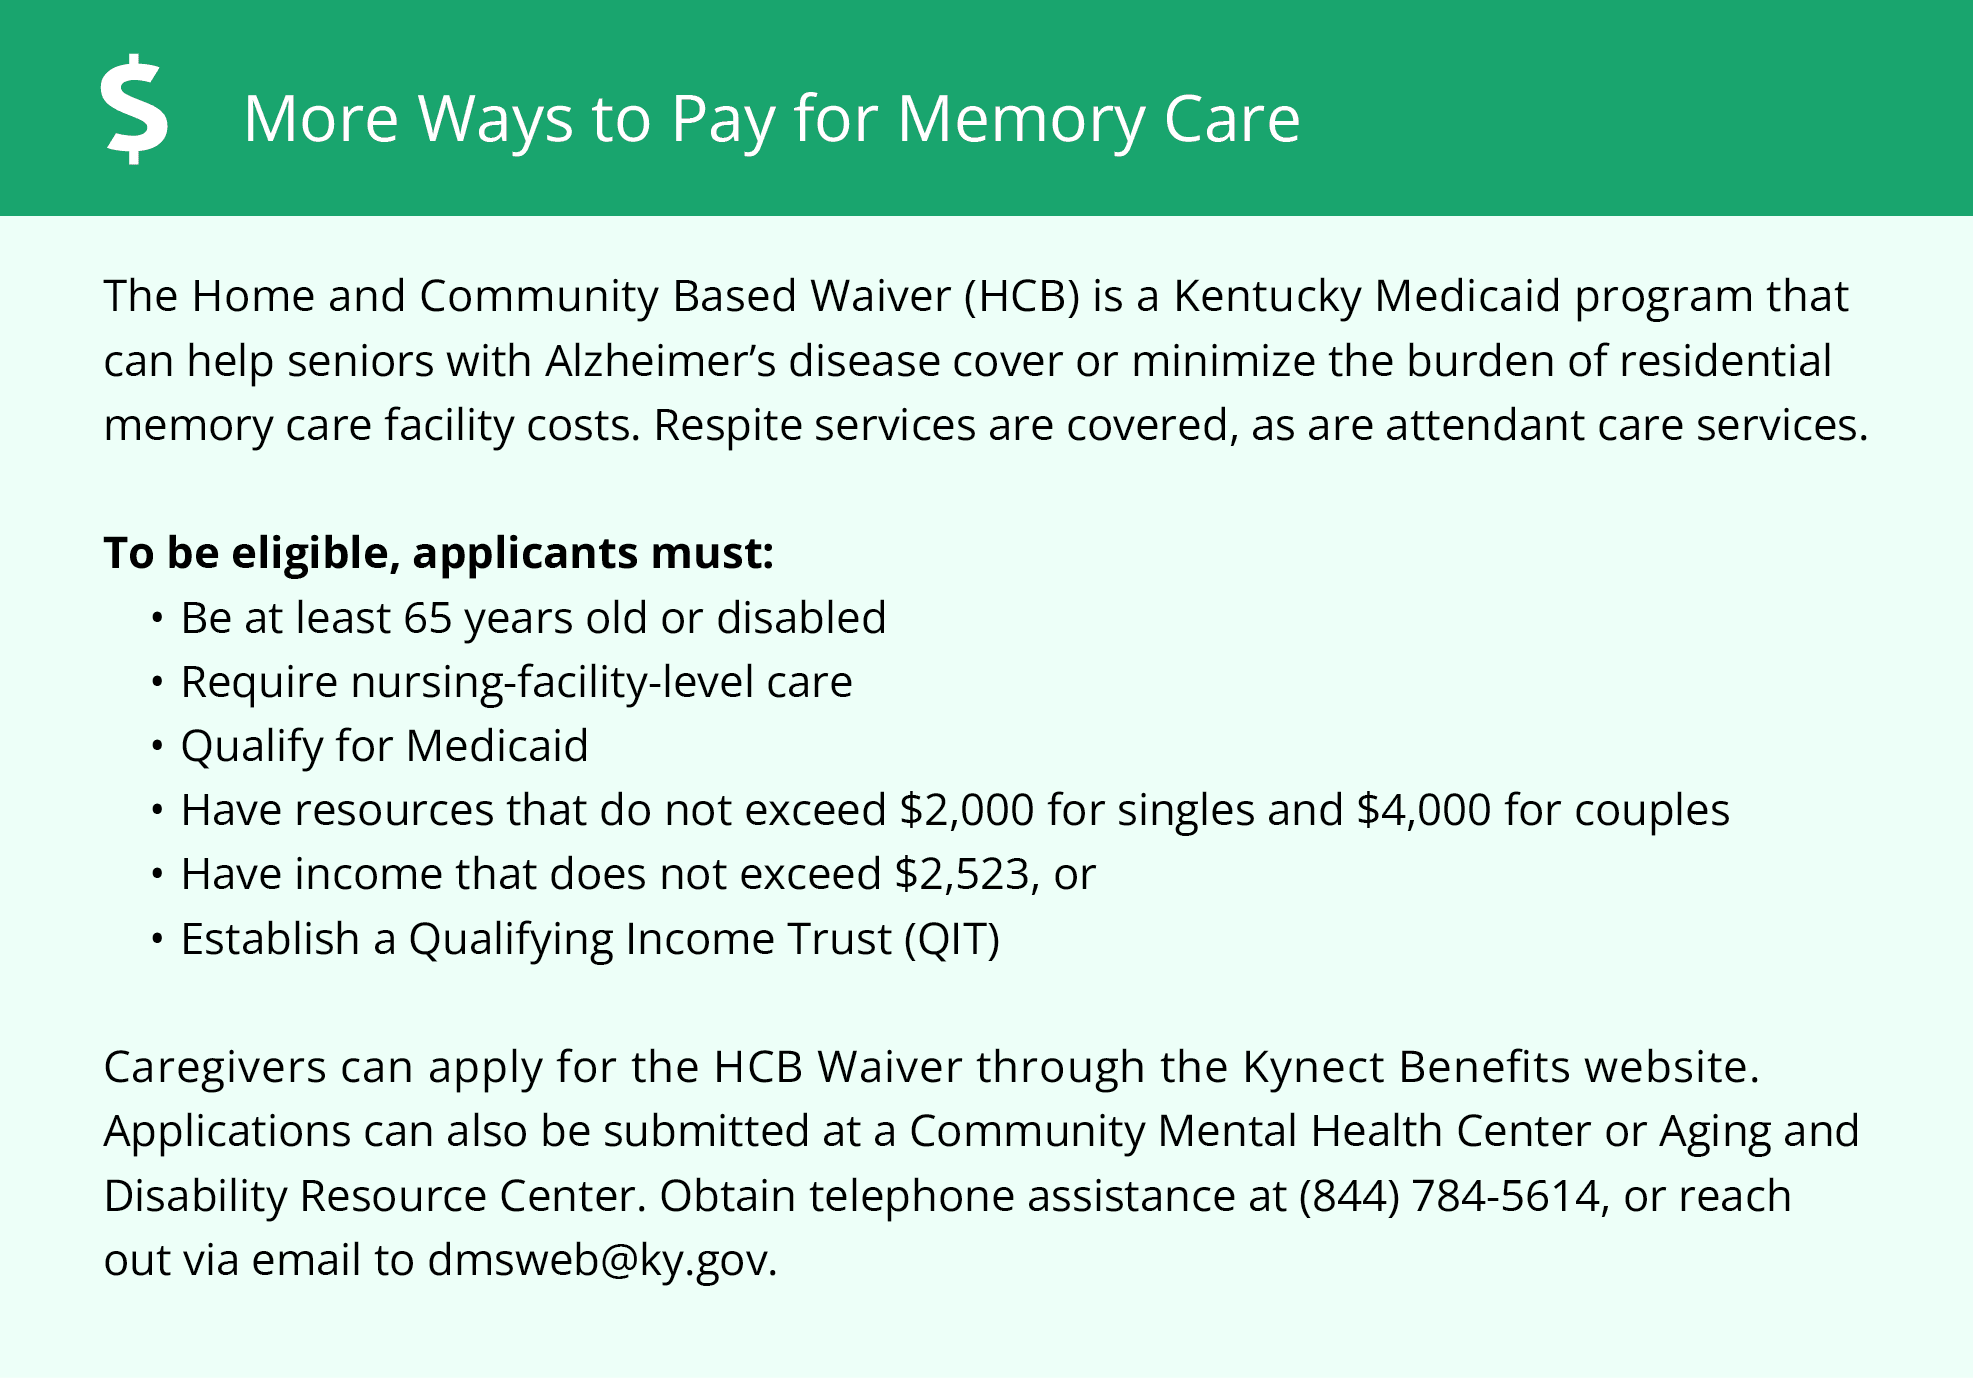 More ways to pay for memory care in KY